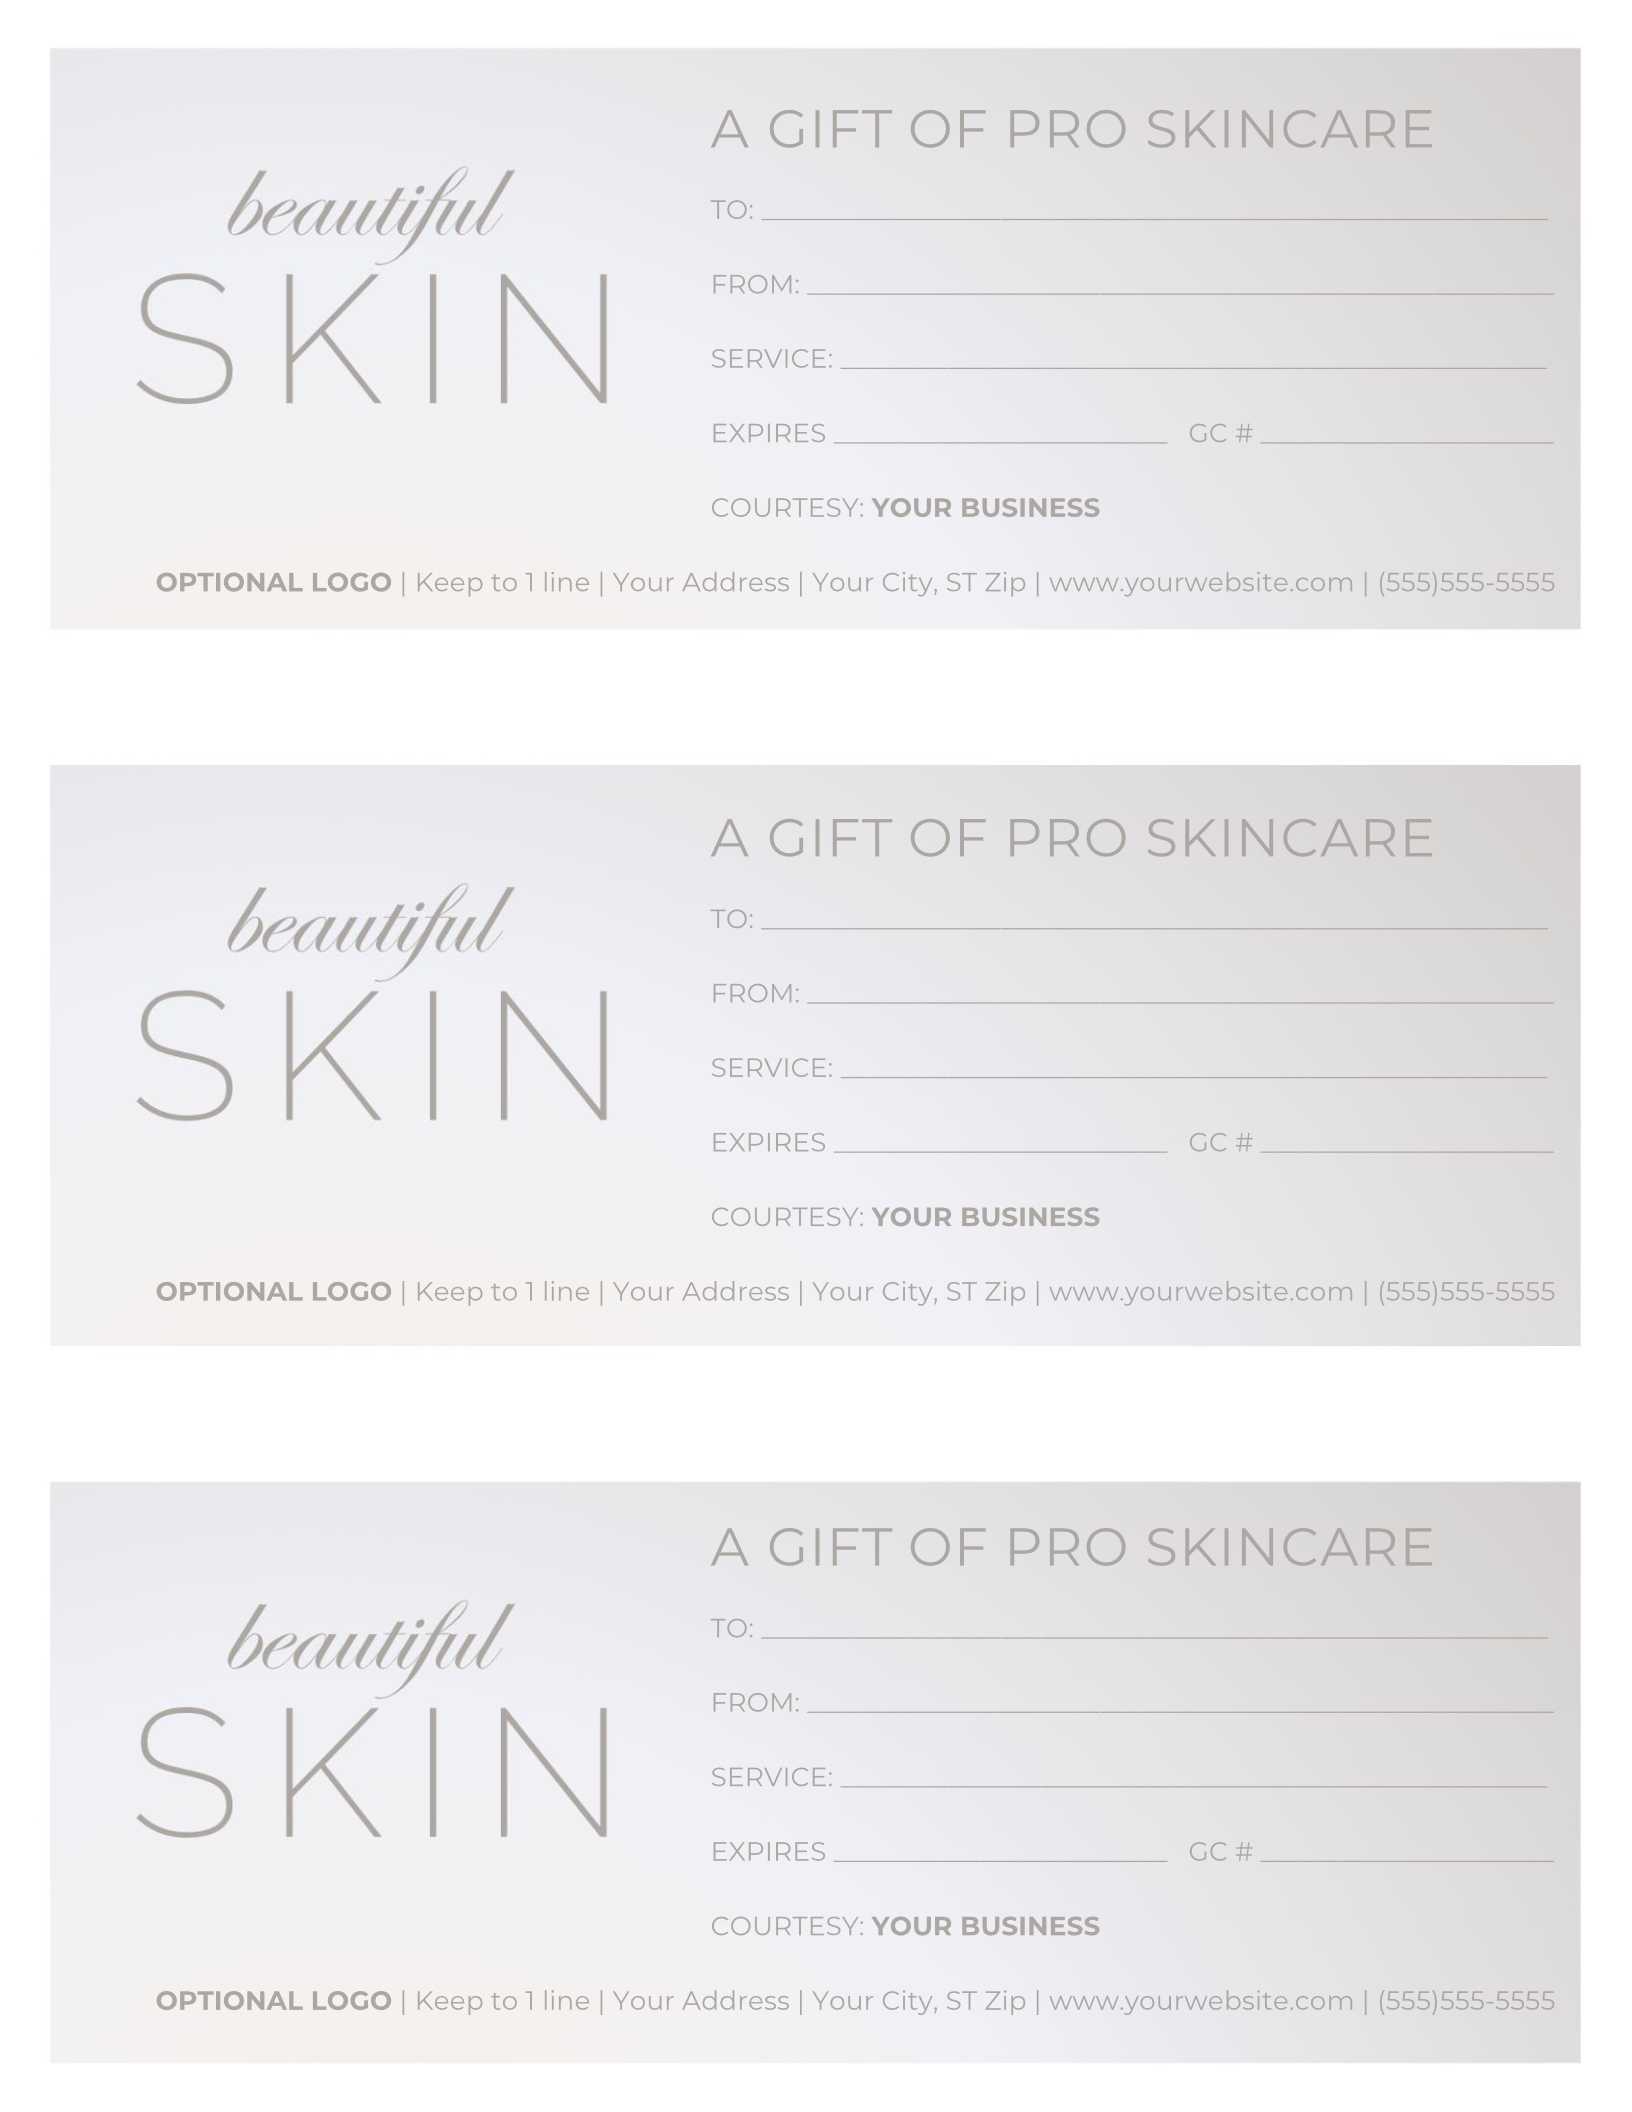 Free Gift Certificate Templates For Massage And Spa Regarding Gift Certificate Log Template